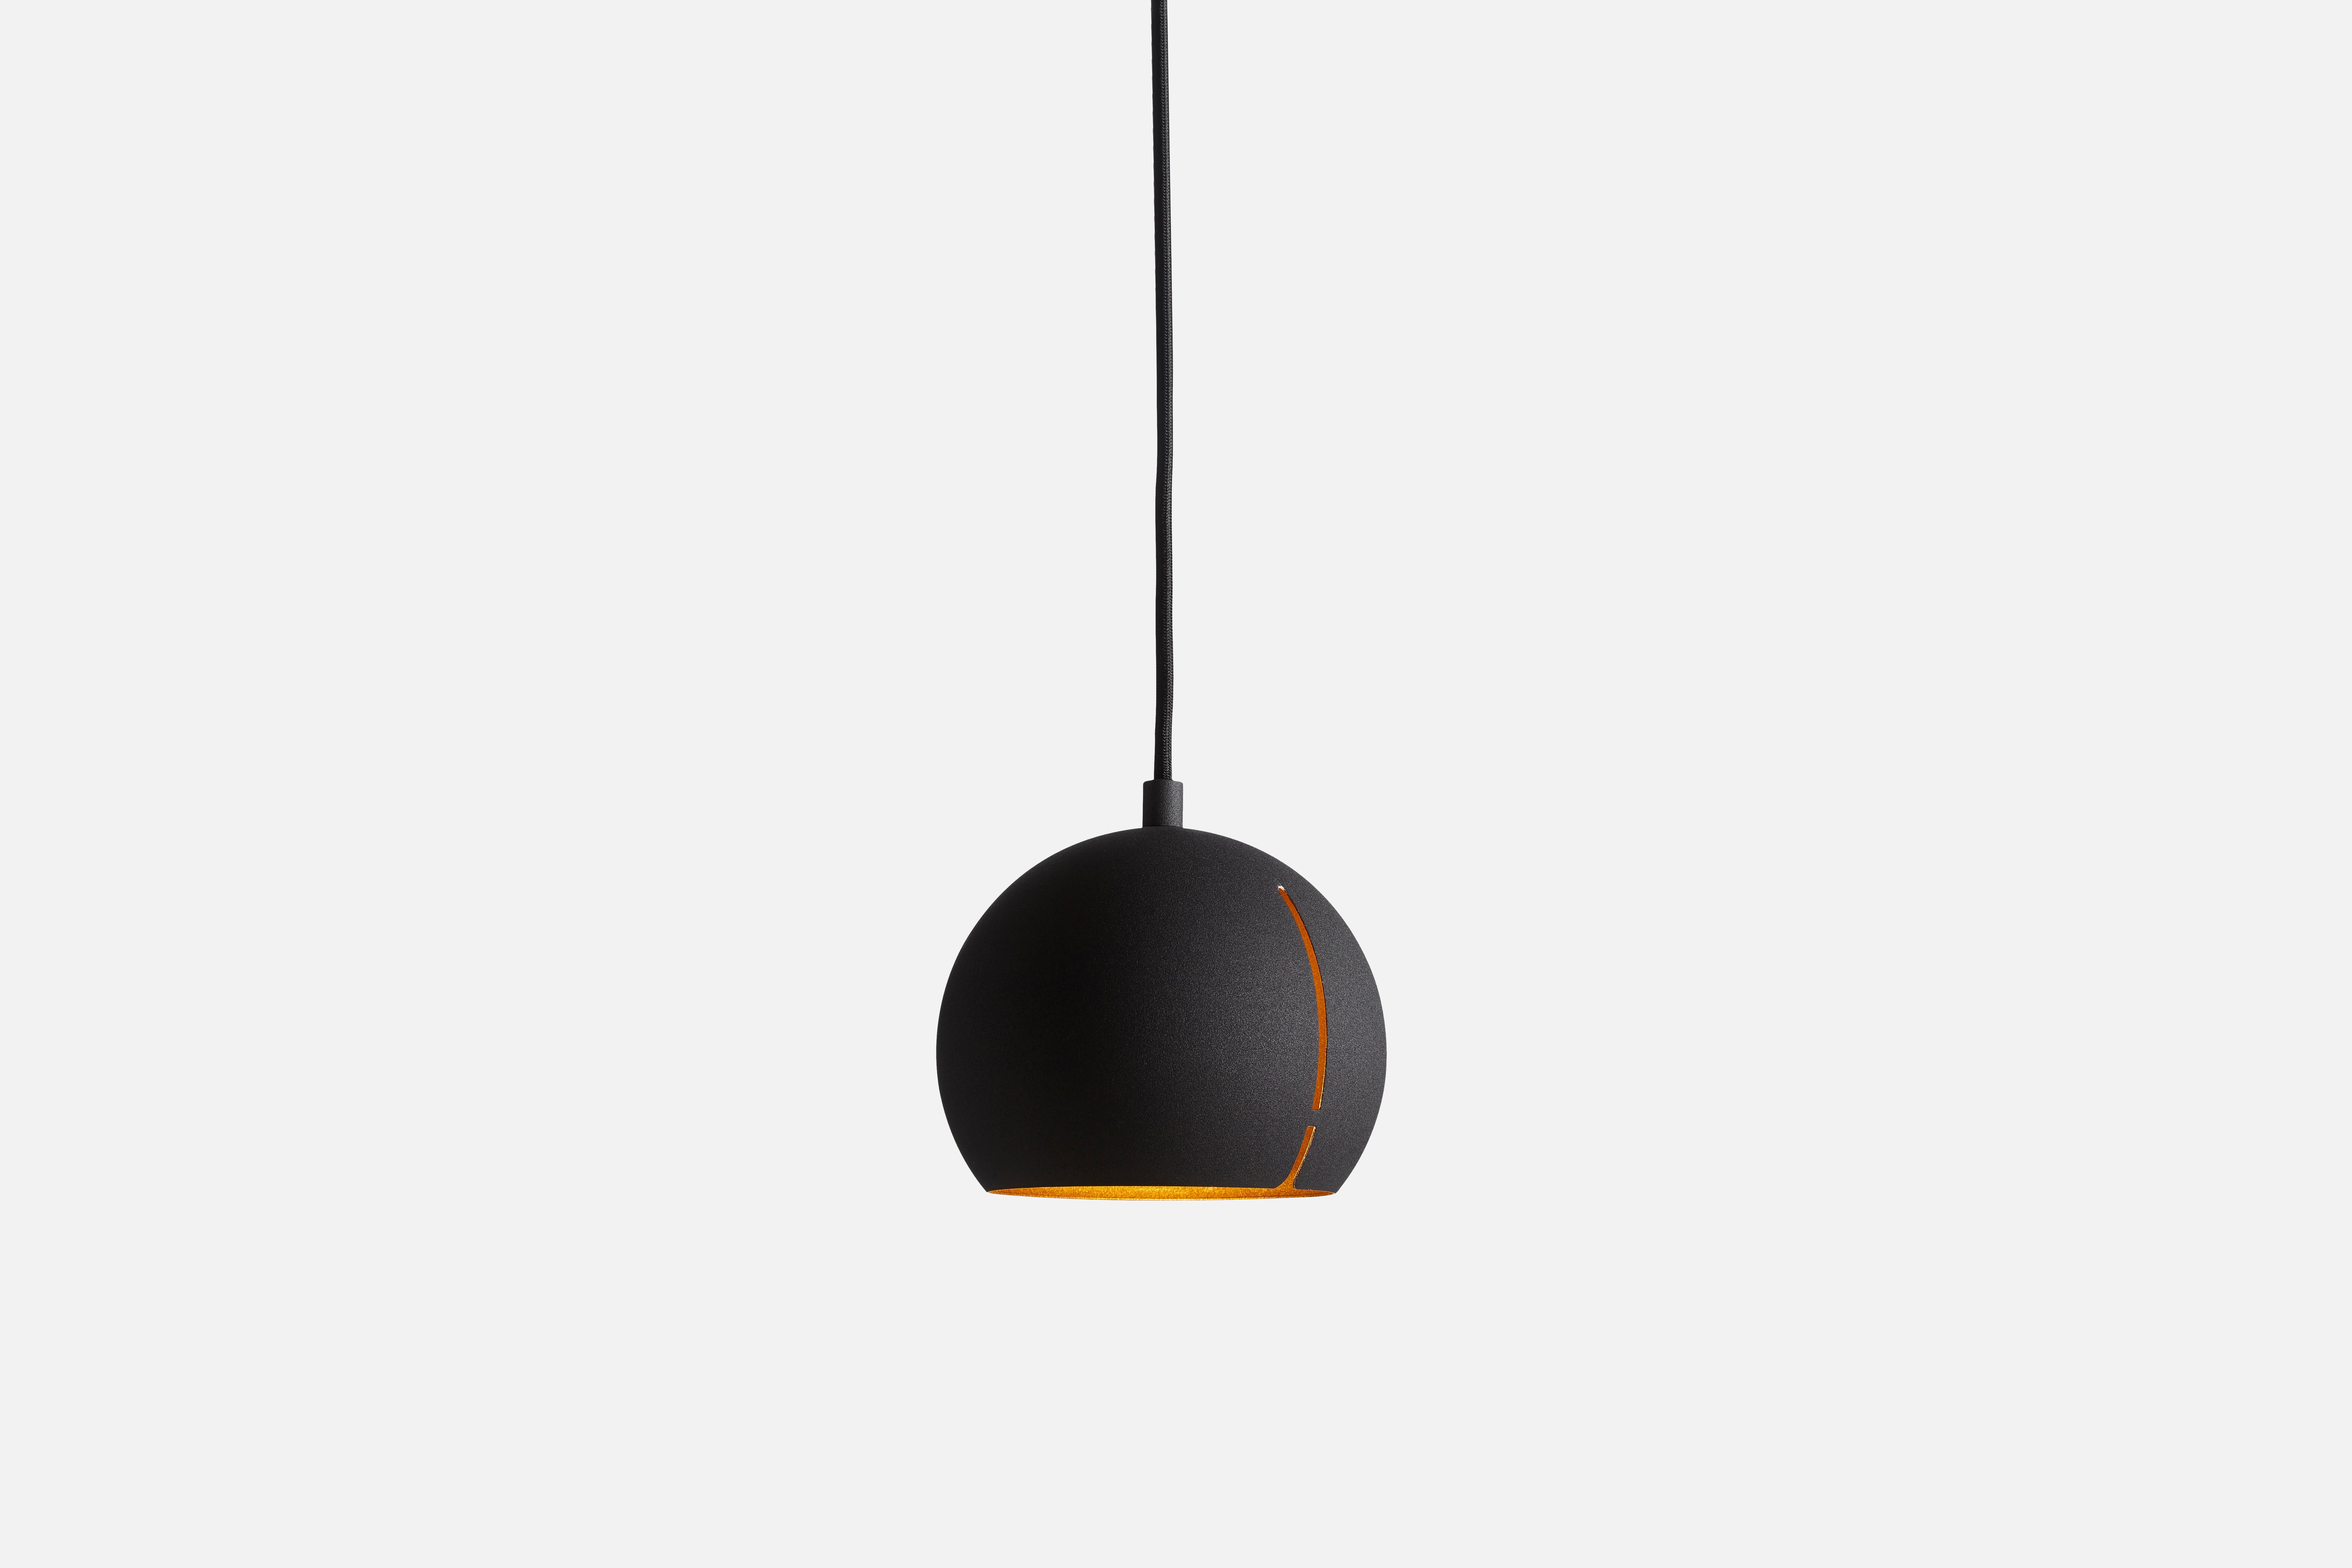 Round gap pendant lamp by Nur design.
Materials: metal.
Dimensions: D 15 x H 14 cm.

NUR design is a Danish design studio focusing on Nordic traditions with a strive to create classic and functional design. In German, the word NUR means ‘only’